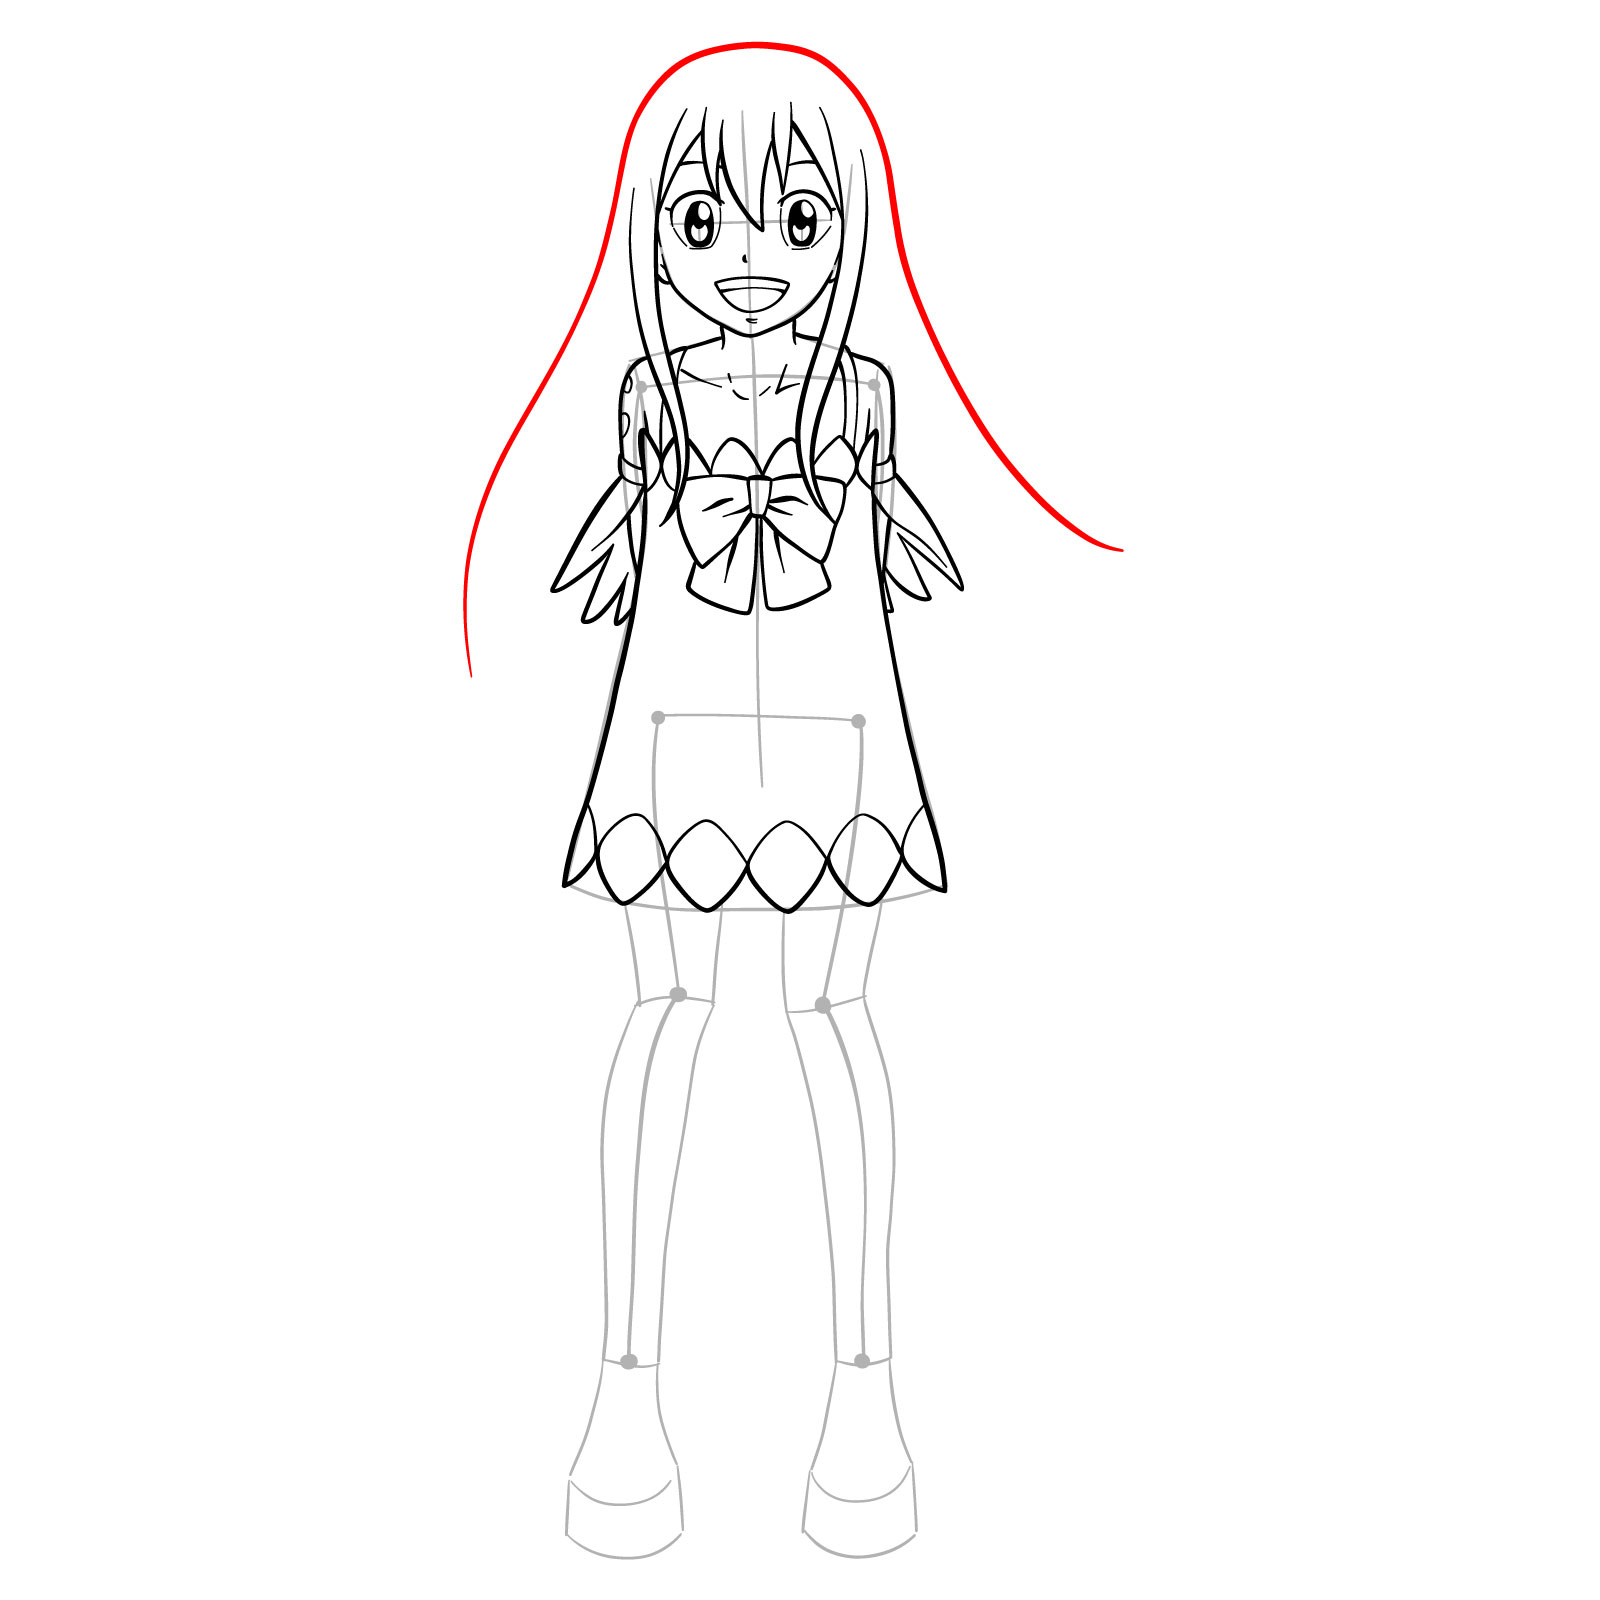 How to draw Wendy Marvell from Fairy Tail - step 17